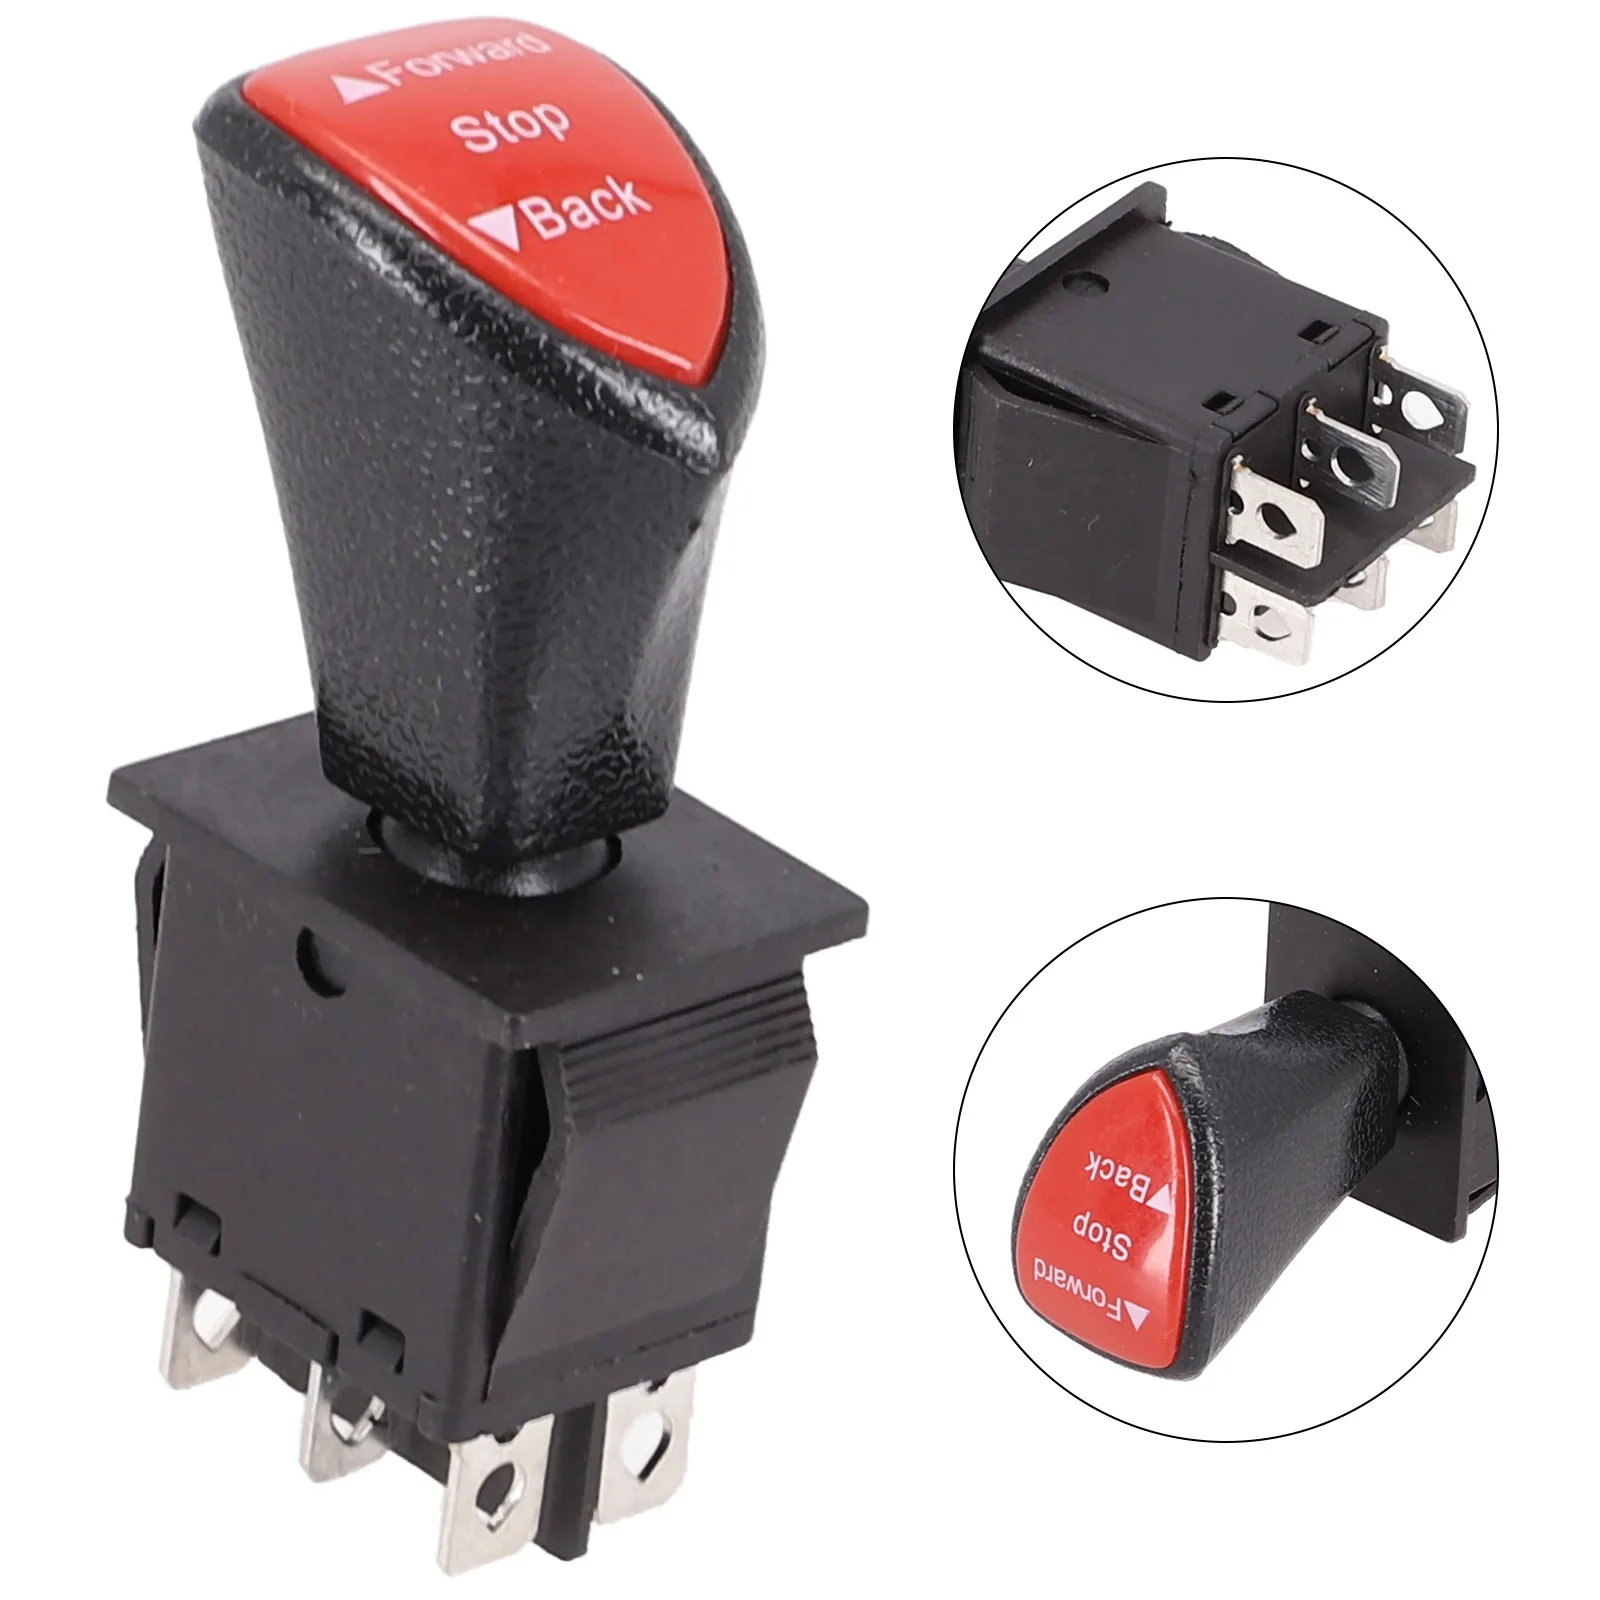 

1pc Forward-Stop-Back DPDT 6Pin Latching Slide Rocker Switch KCD4-604-6P 125V 250V Auto Interior Switches Replacement